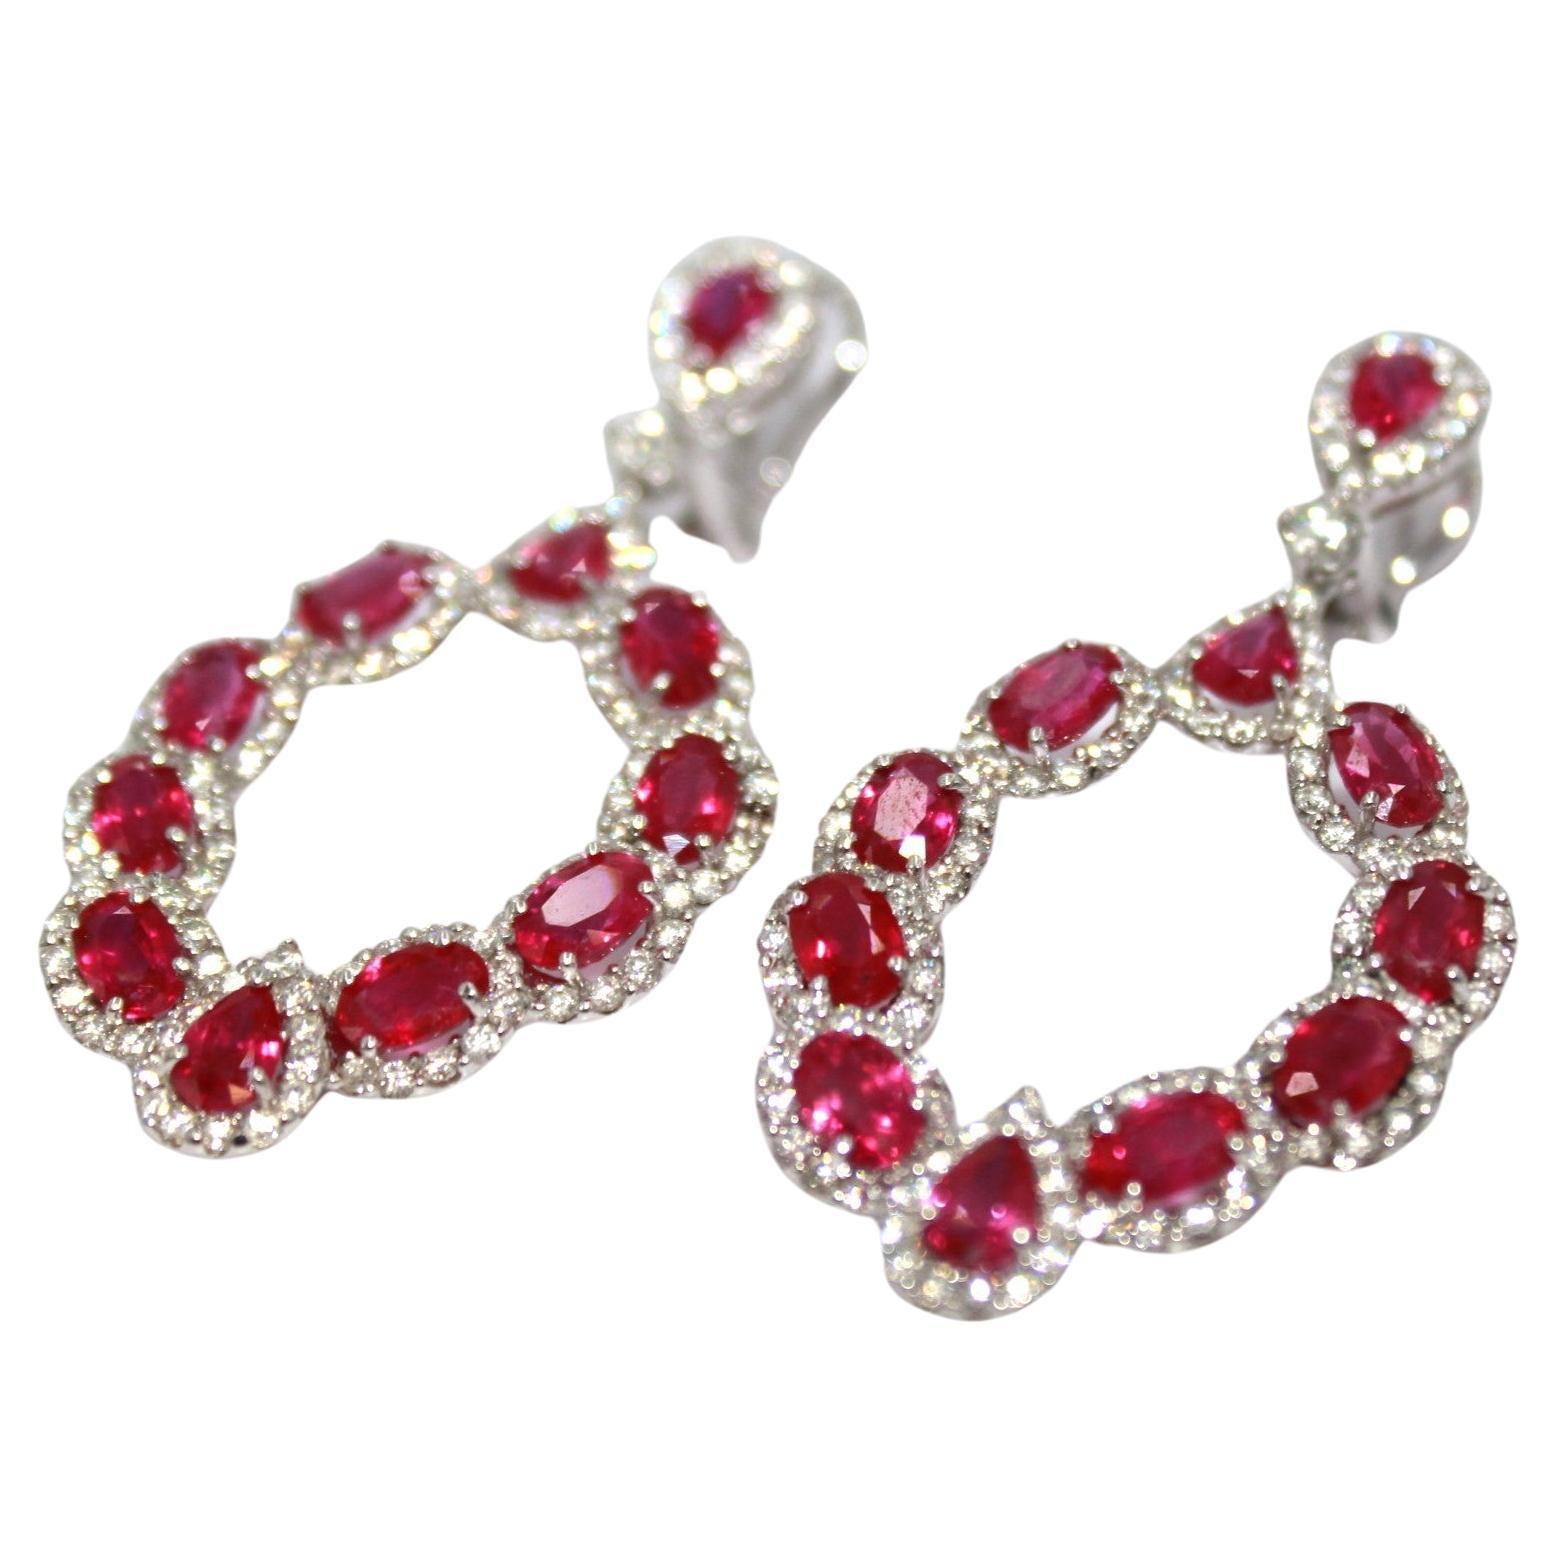 13.32 carats oval & pear-shape Burma Ruby with 250 round diamonds, totaling a diamond weight of 4.00 carats. 

This stunning Ruby & Diamond Earring will highlight your uniqueness and elegance. 

Item Details:
- Type: Earring
- Metal: 18K Gold
-